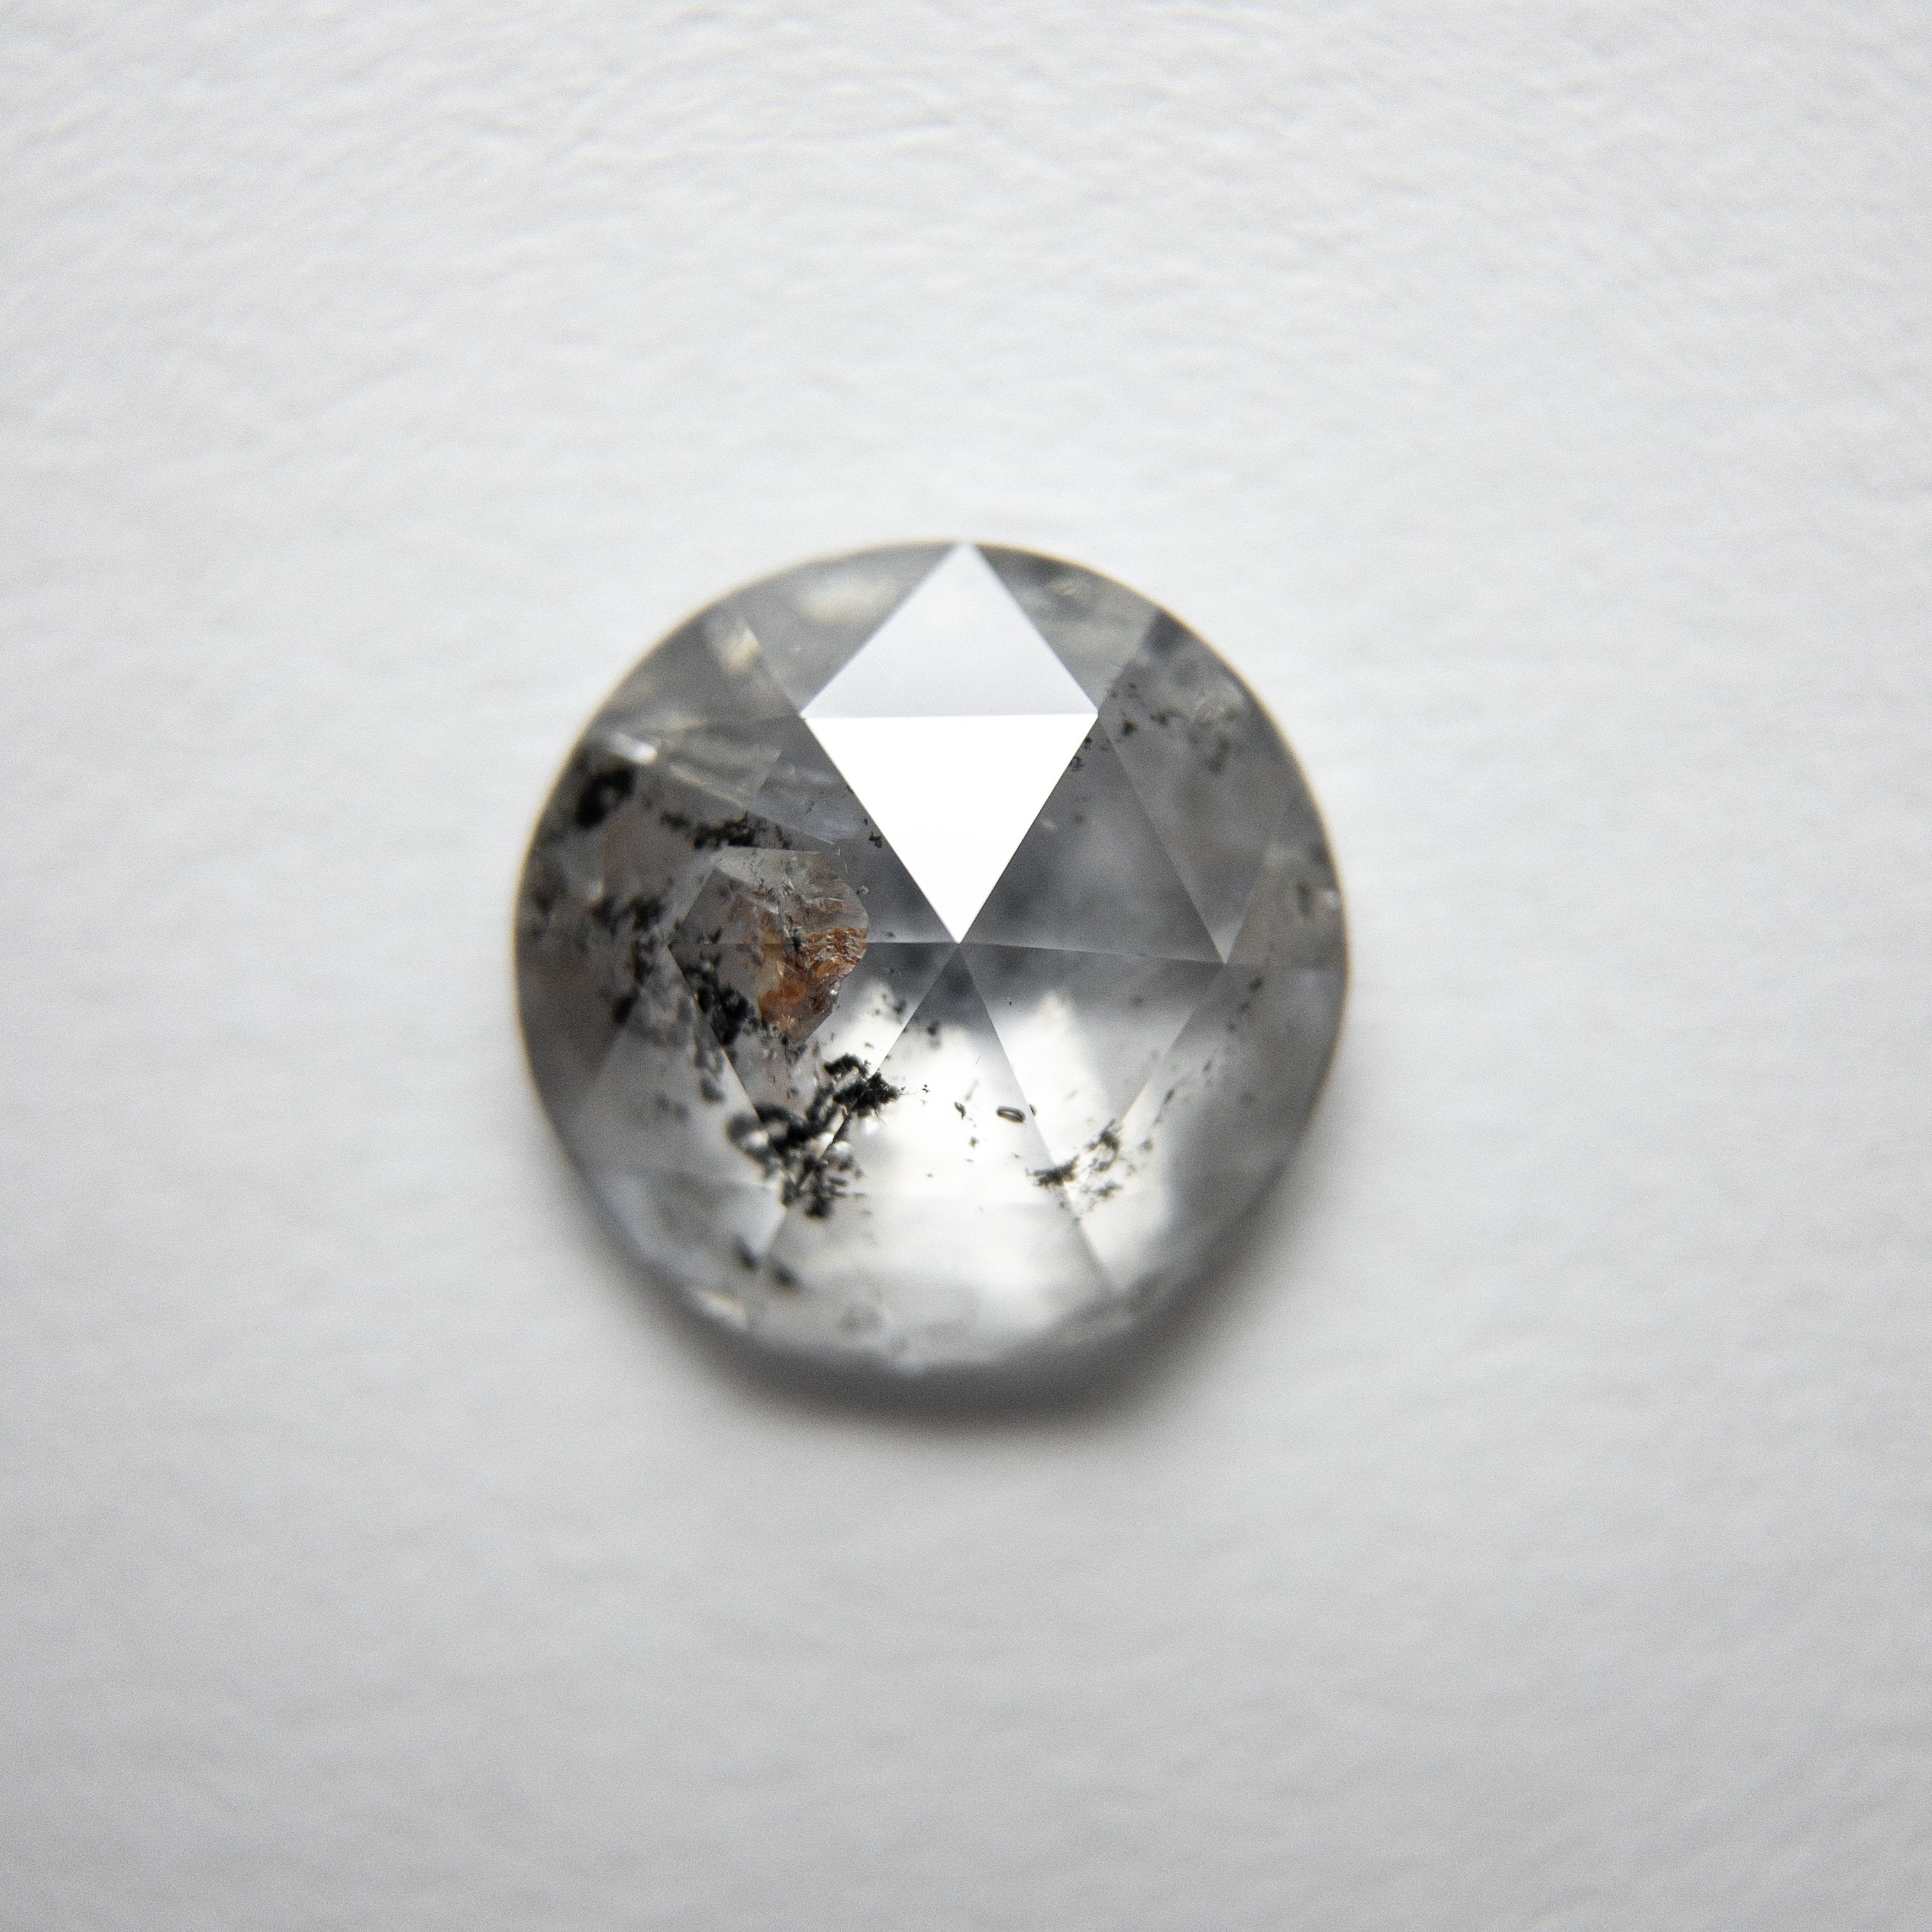 1.69ct 8.23x8.17x2.97mm Round Rosecut 18220-02 HOLD D1235 10/7/20